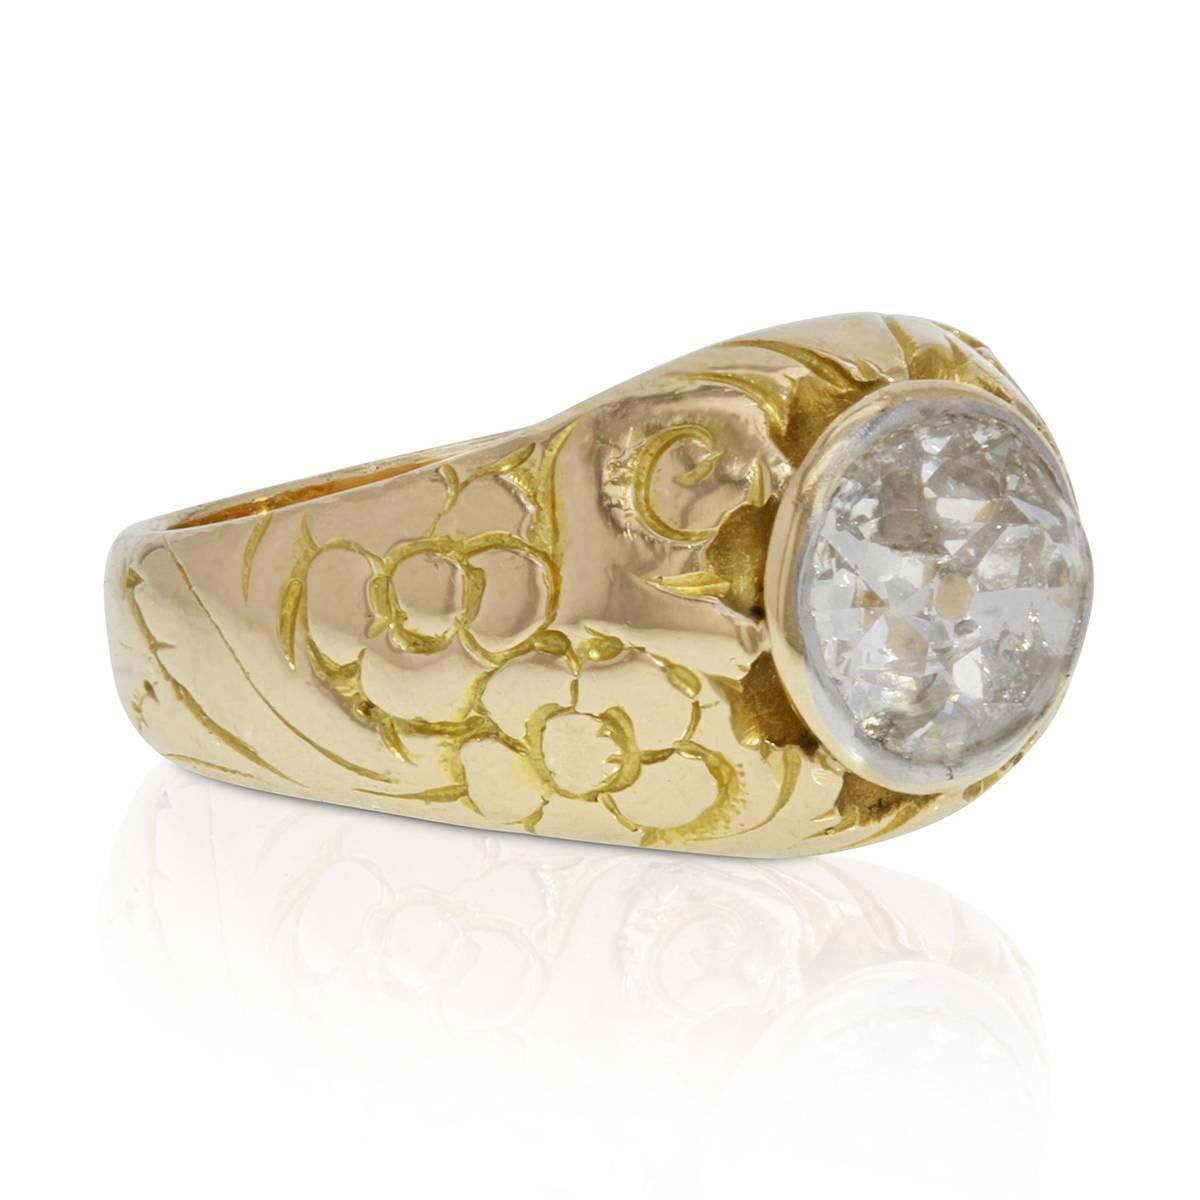 An early 20th century round cut old minor diamond meets 19th century Victorian style in this mid-century interpretation of solitaire gent's ring. Crafted in 18k yellow and intricately hand-engraved with a stylish floral design, the high-polished